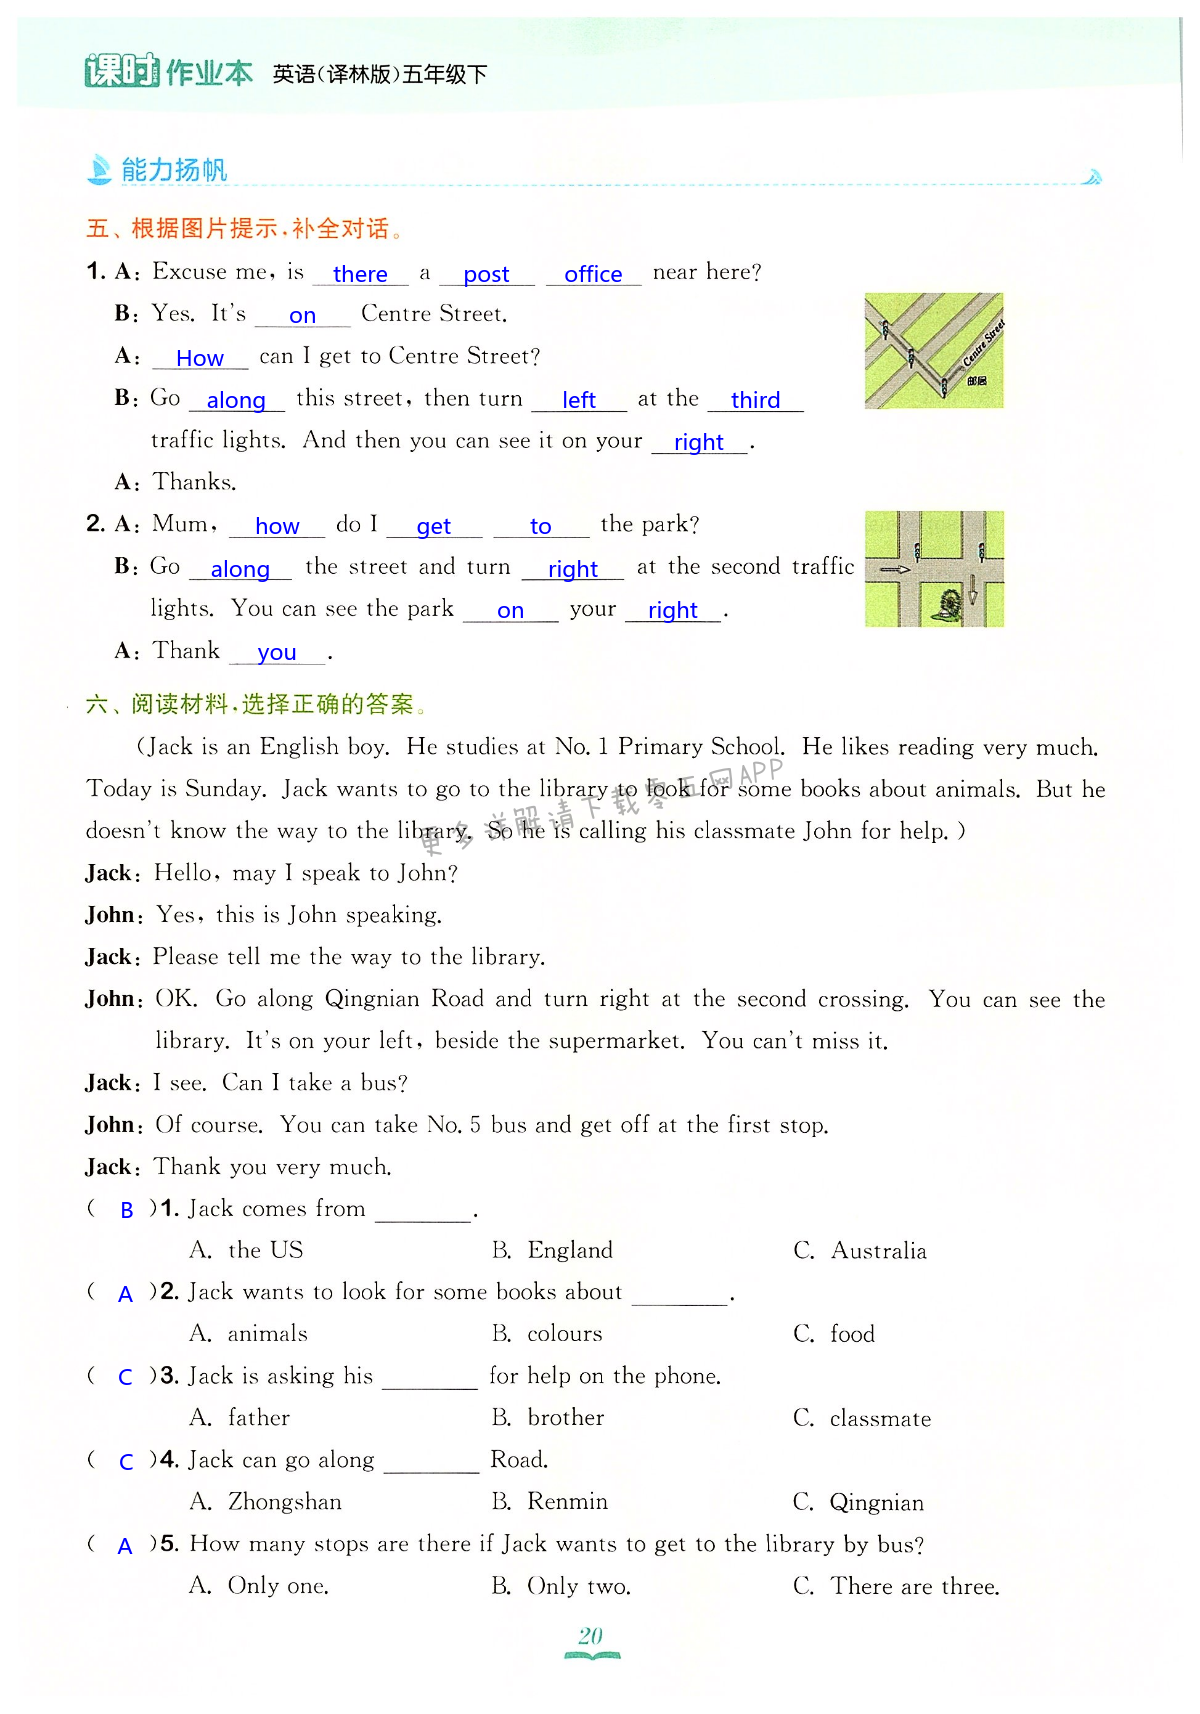 Unit 3 Asking the way - 第20页